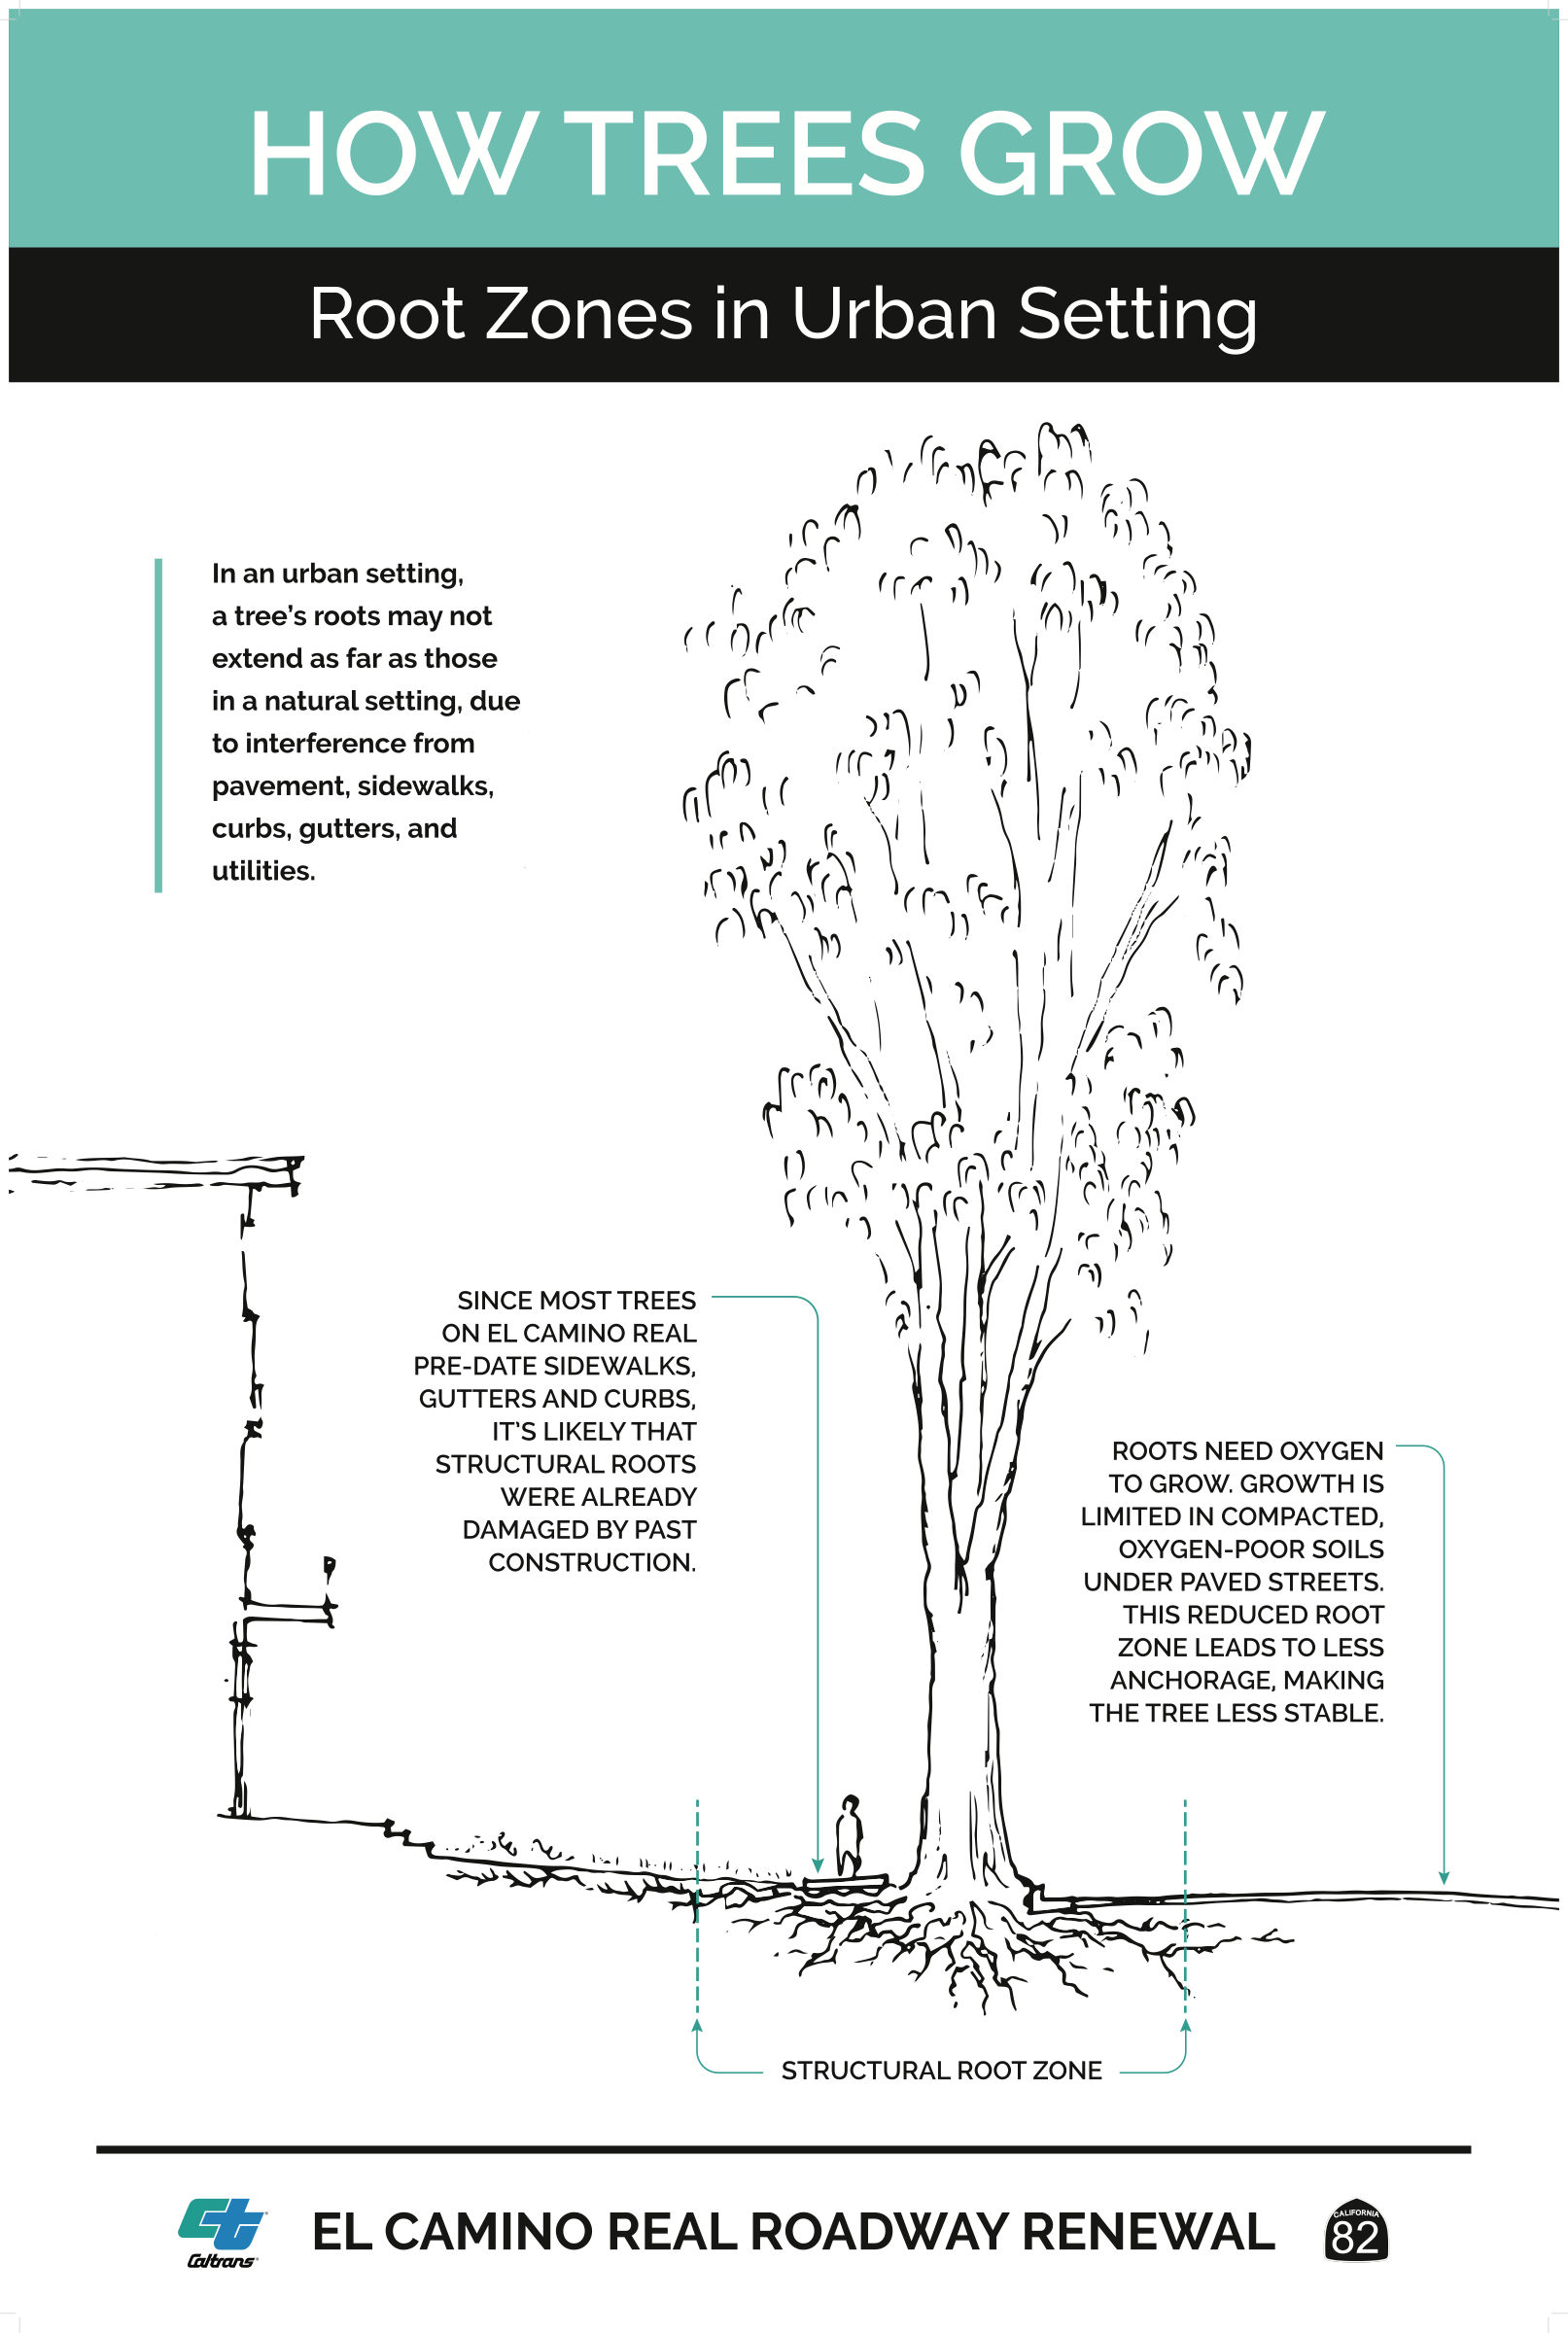 how trees grow - root zones in urban setting